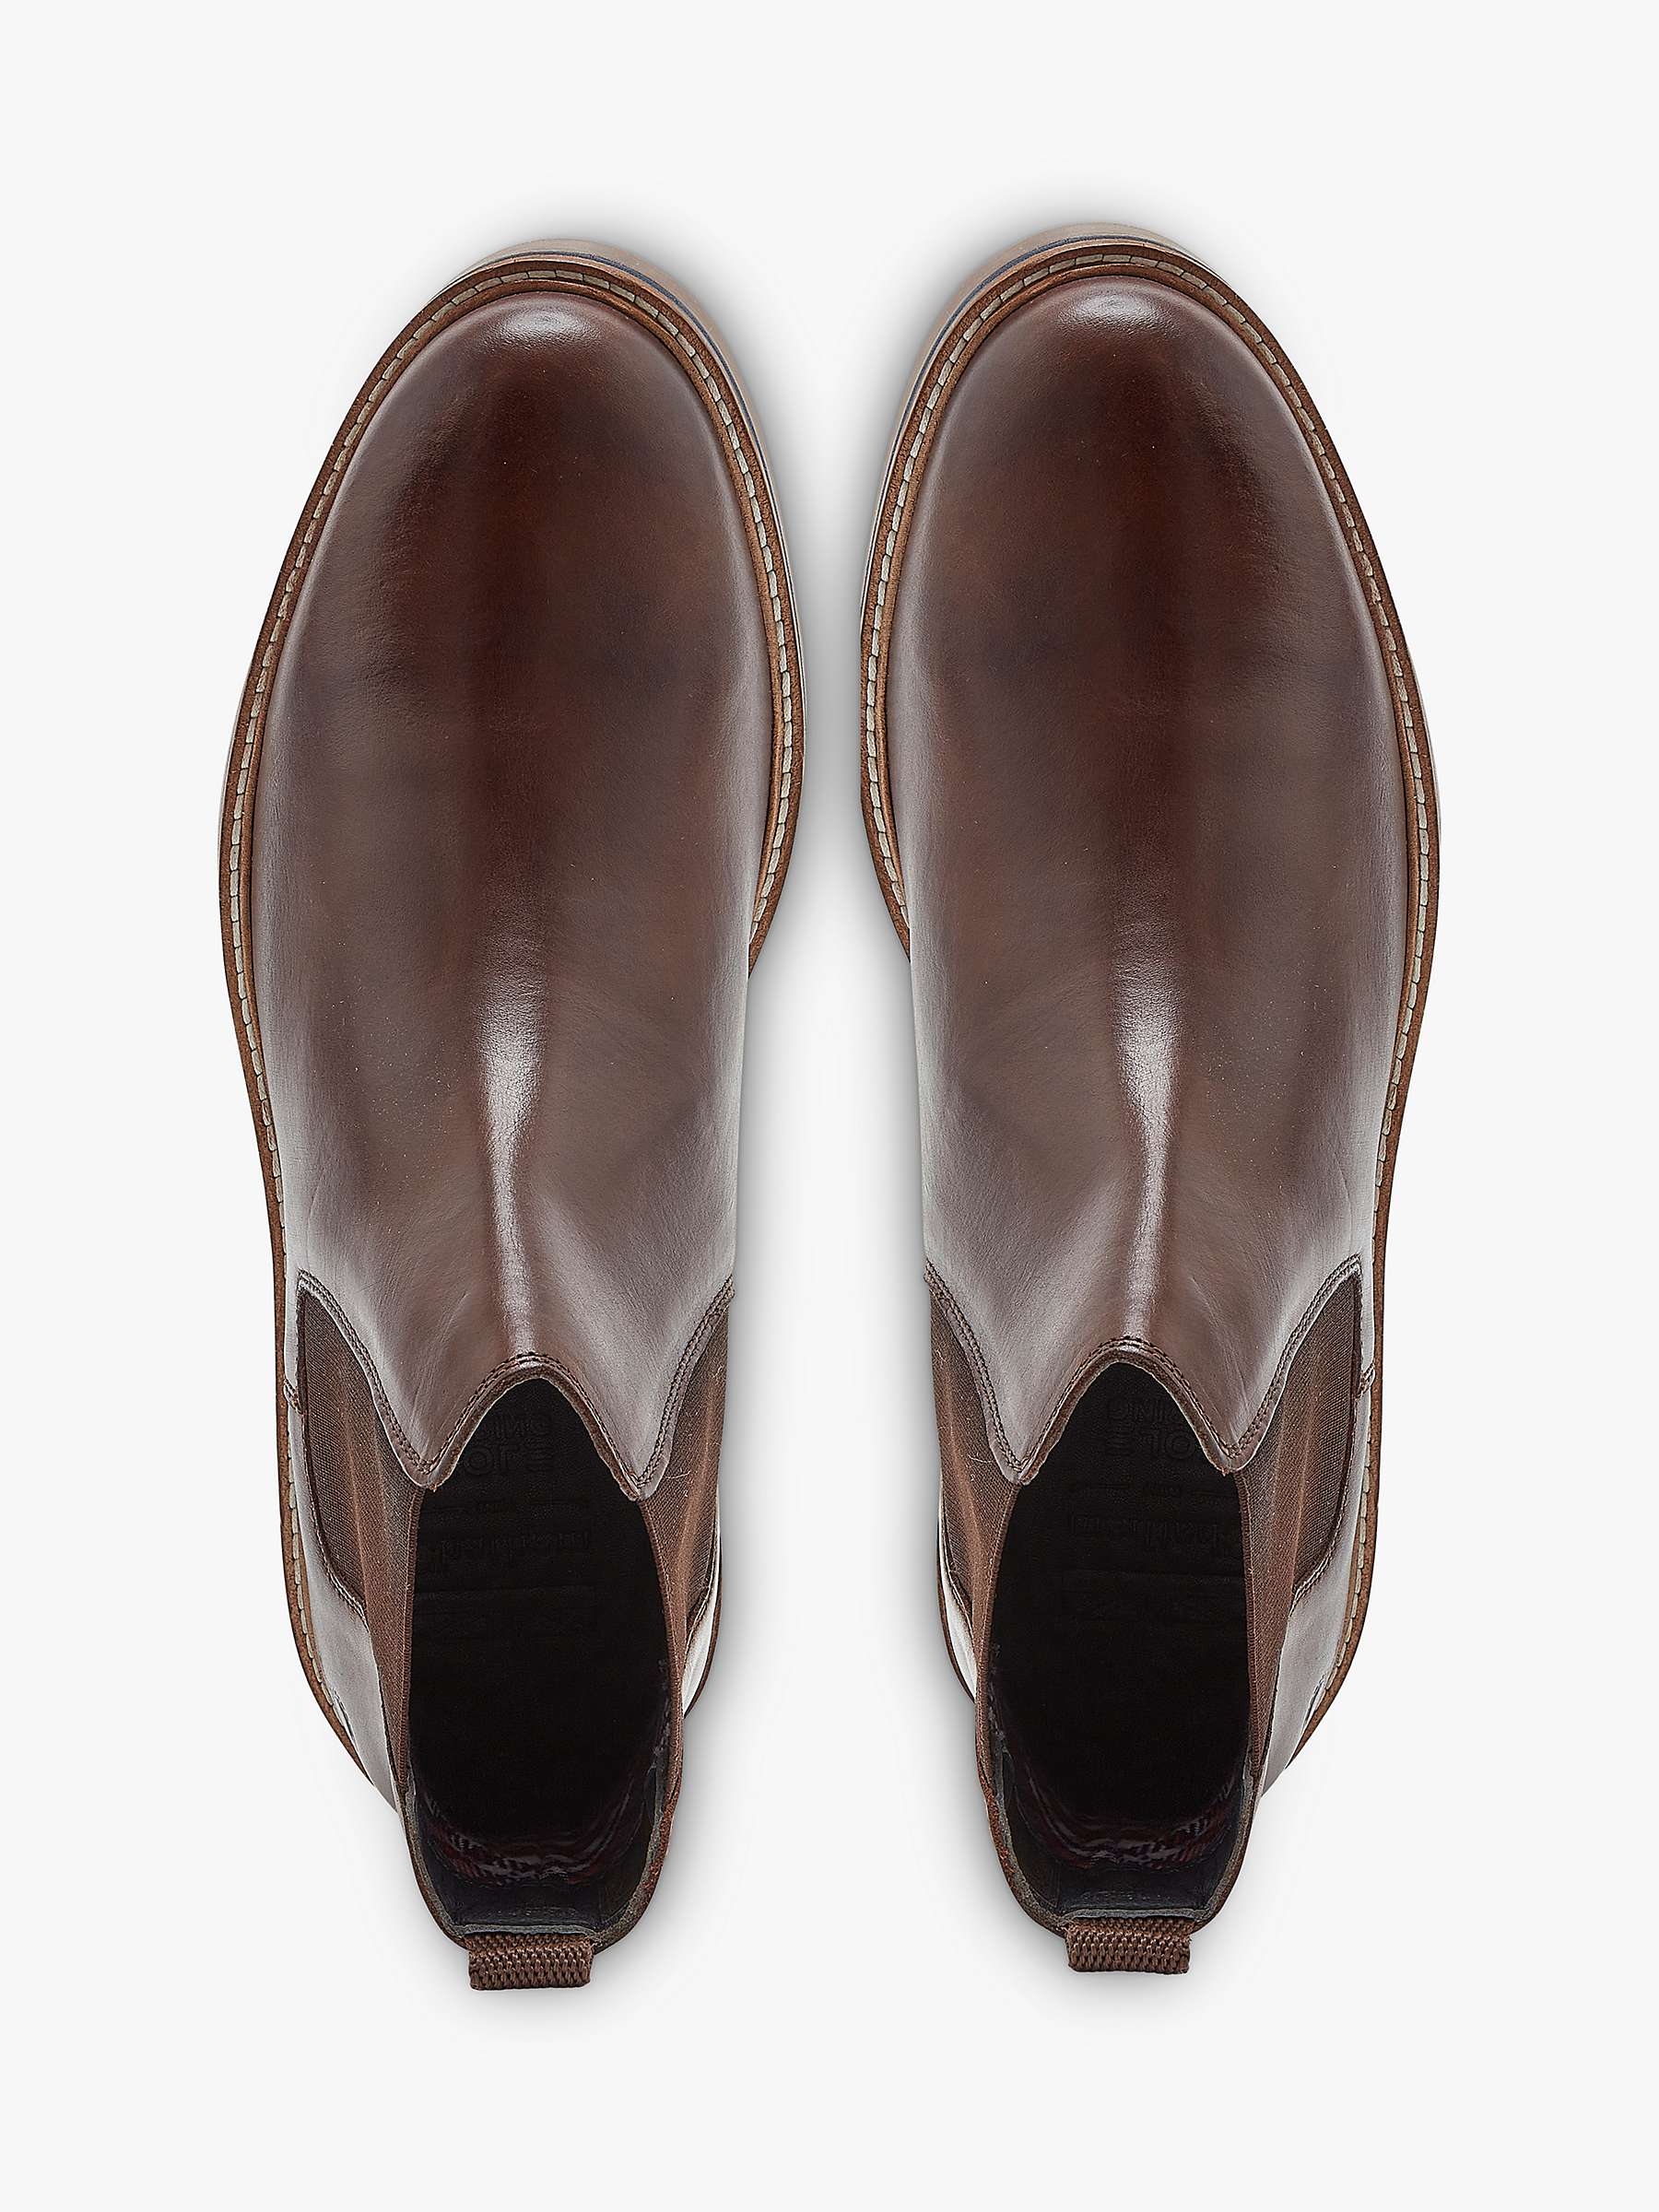 Buy Chatham Scafell Chelsea Boots, Brown Online at johnlewis.com